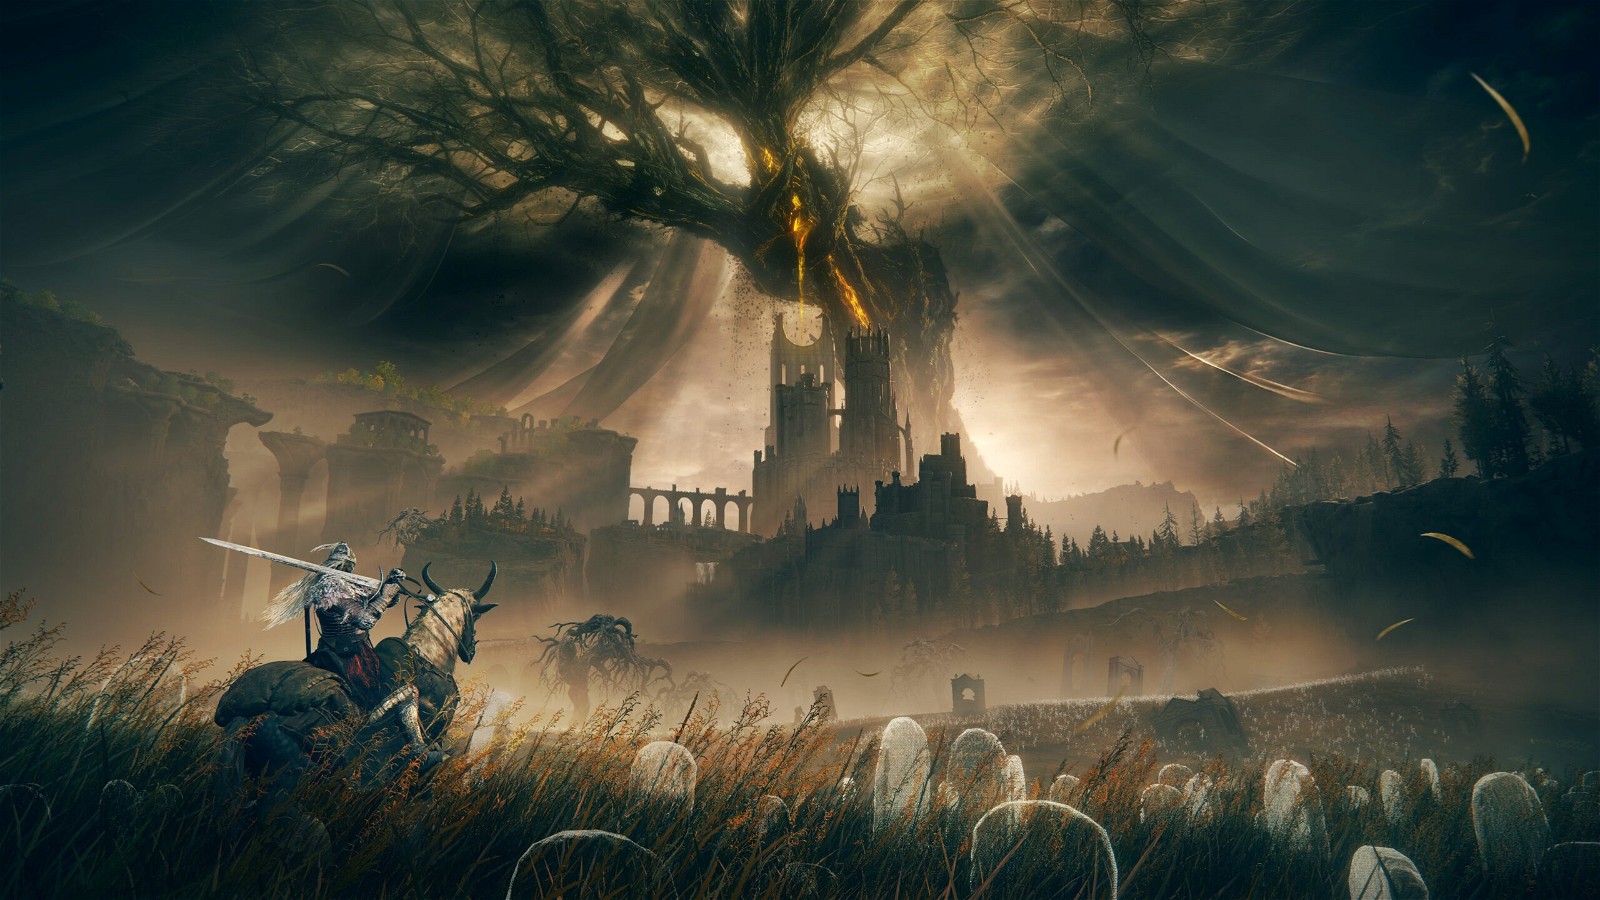 Will Shadow of the Erdtree match the magic of Elden Ring's open world? Image credit: FromSoftware